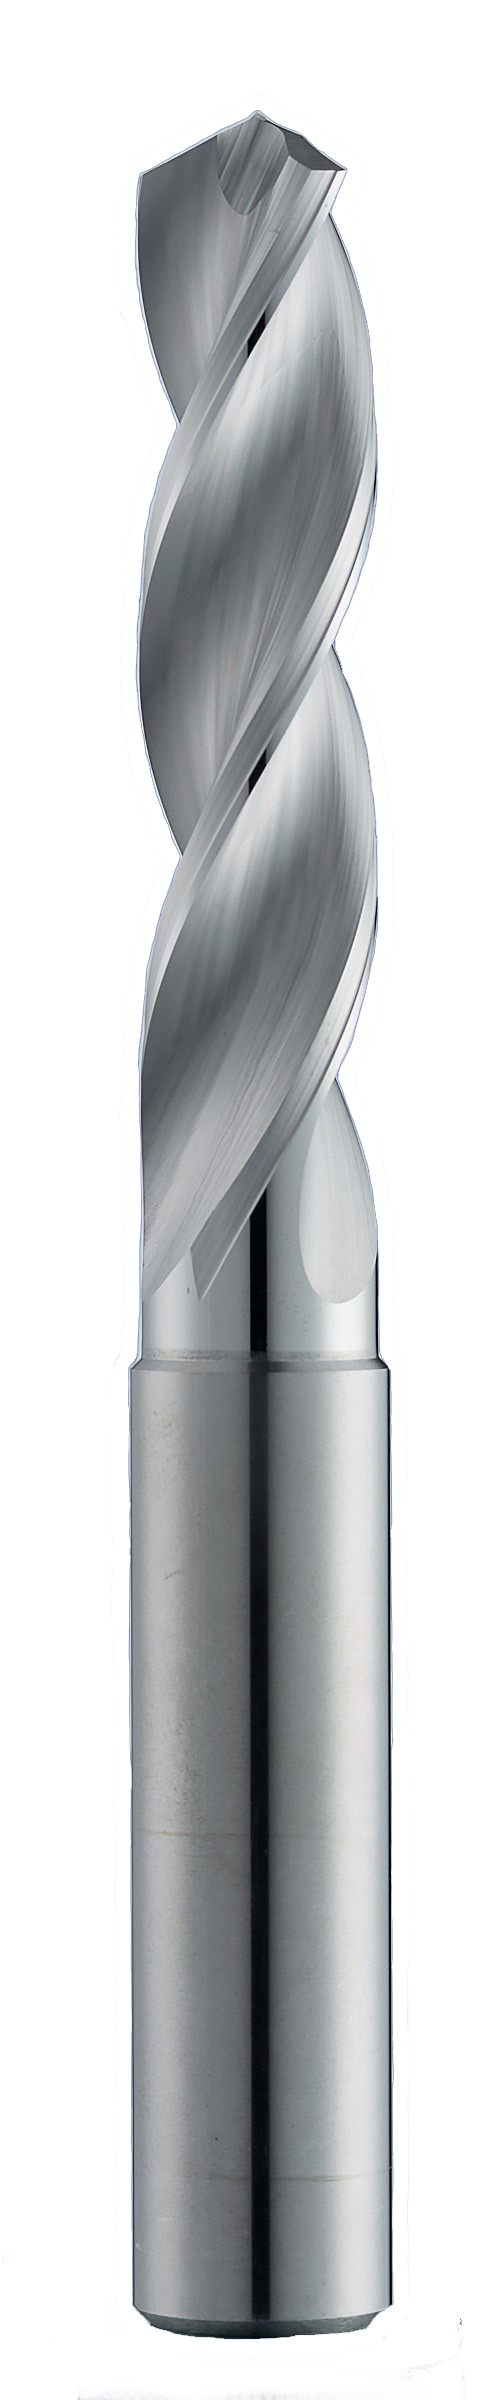 13.00mm Dia, 124 Degree Point, Solid Carbide Drill - 67693